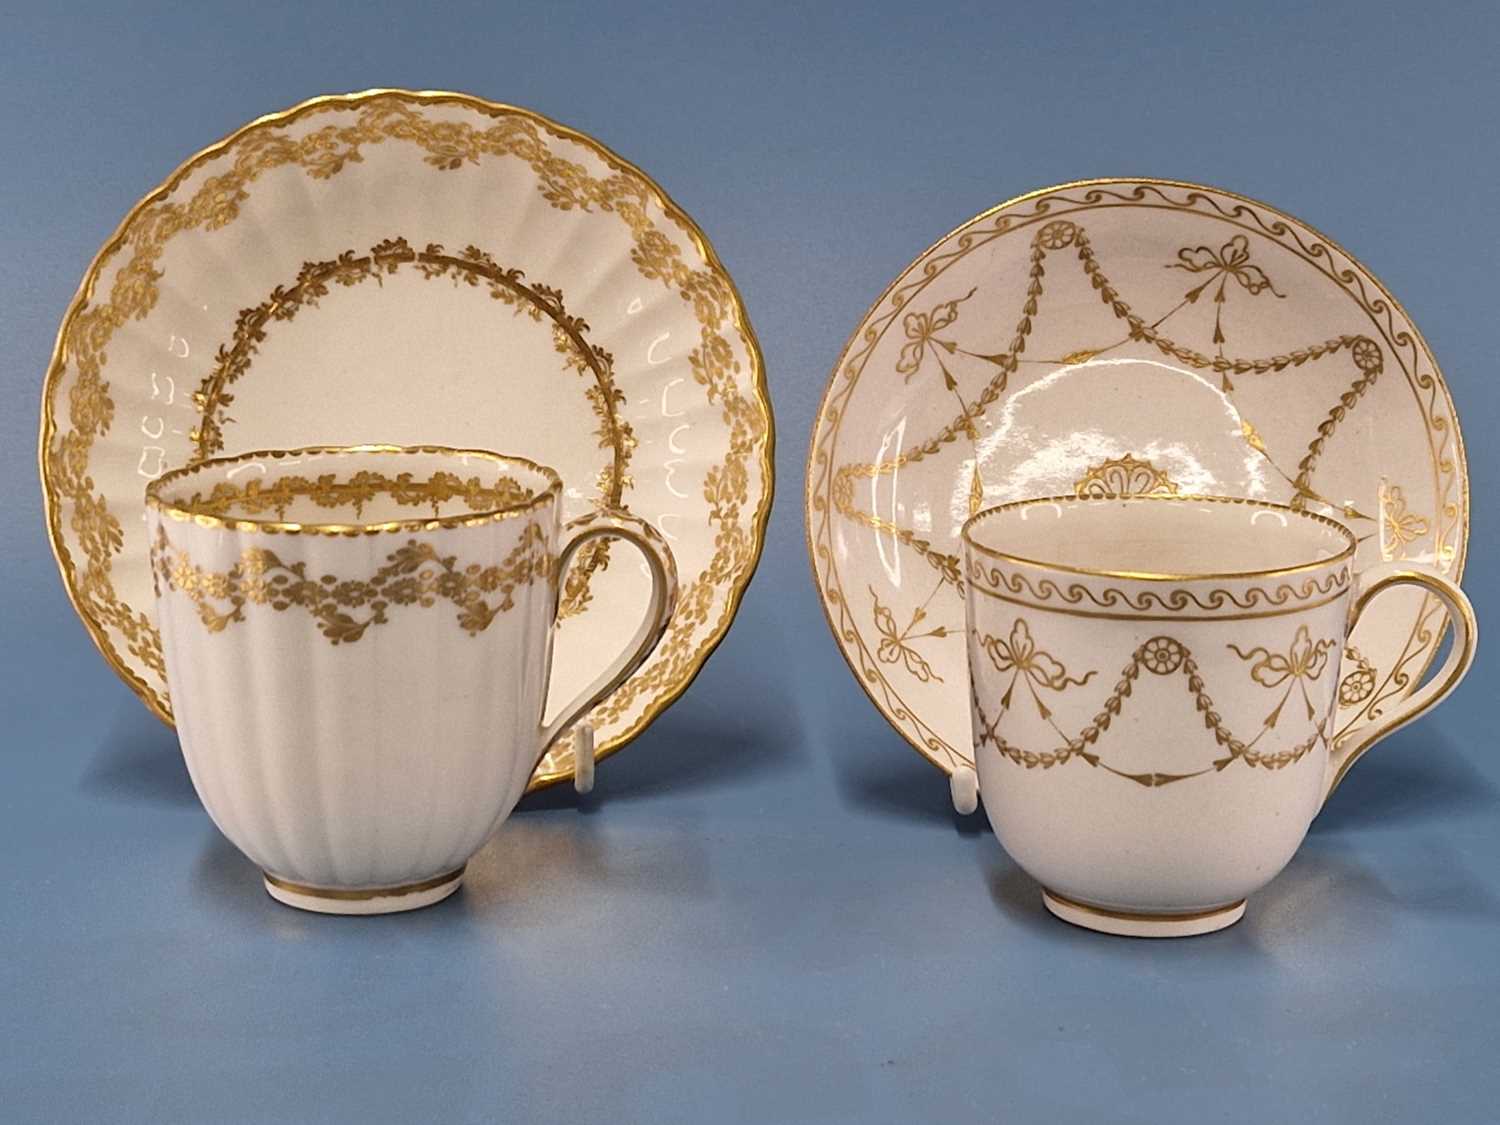 A Derby coffee cup and saucer gilt with swags, blue marks together with a ribbed coffee cup and